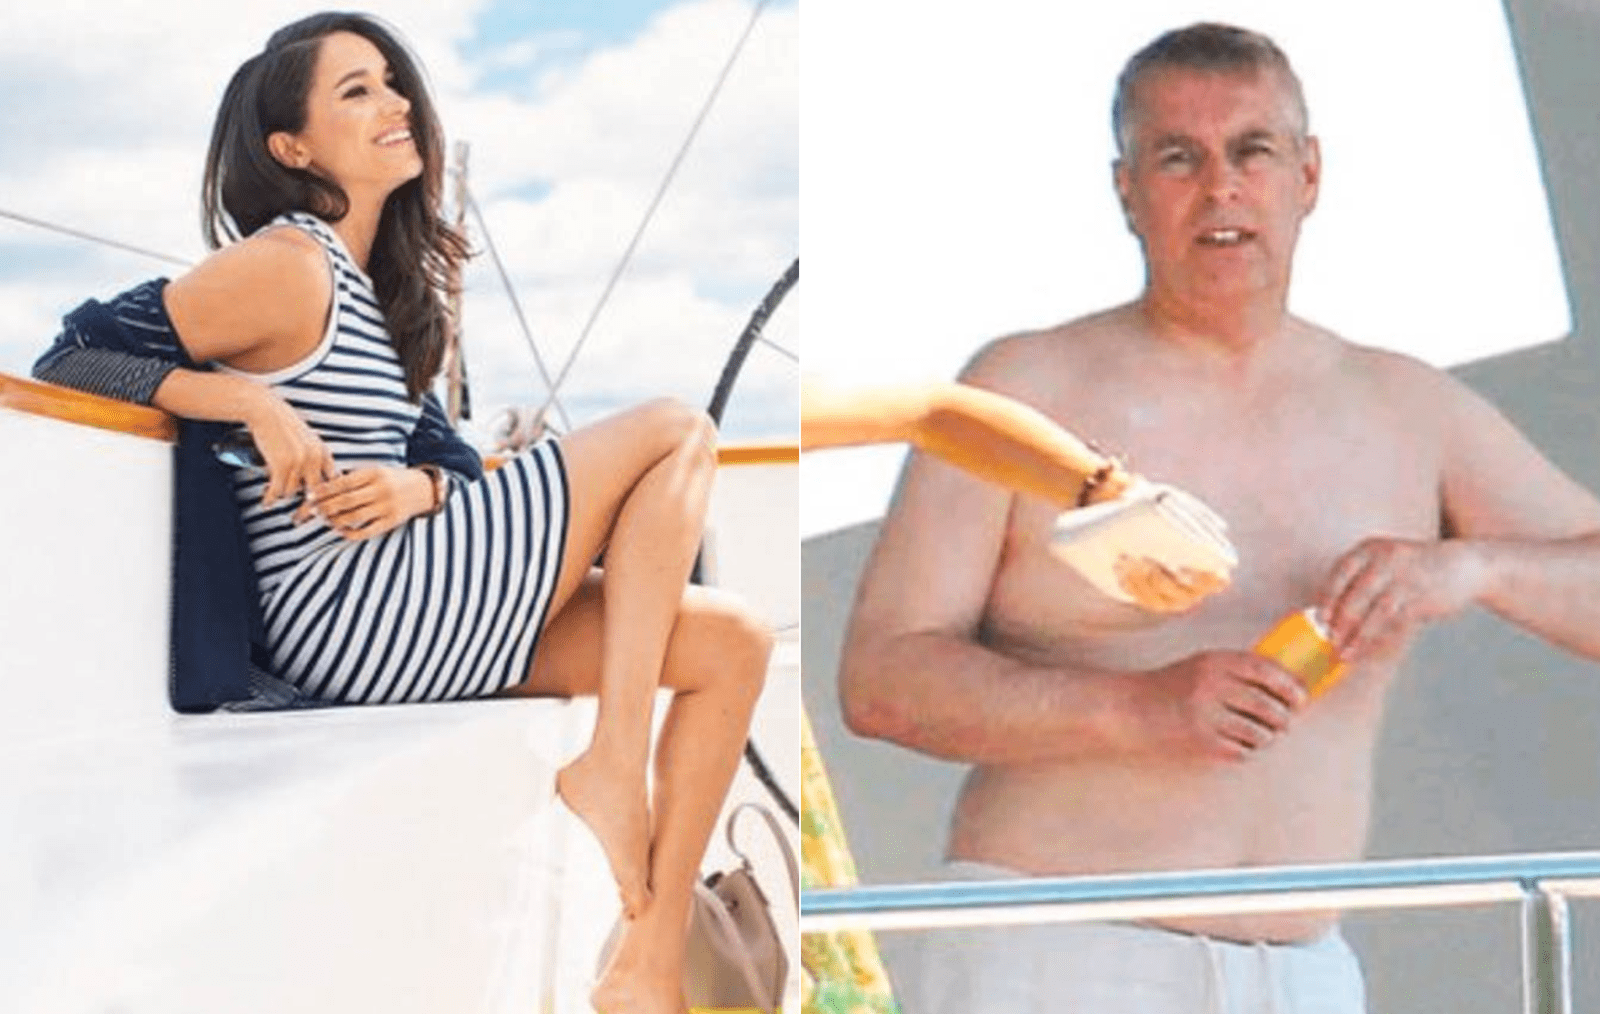 Was Meghan Markle A ‘Yacht Girl’ For ‘Randy Andy’?